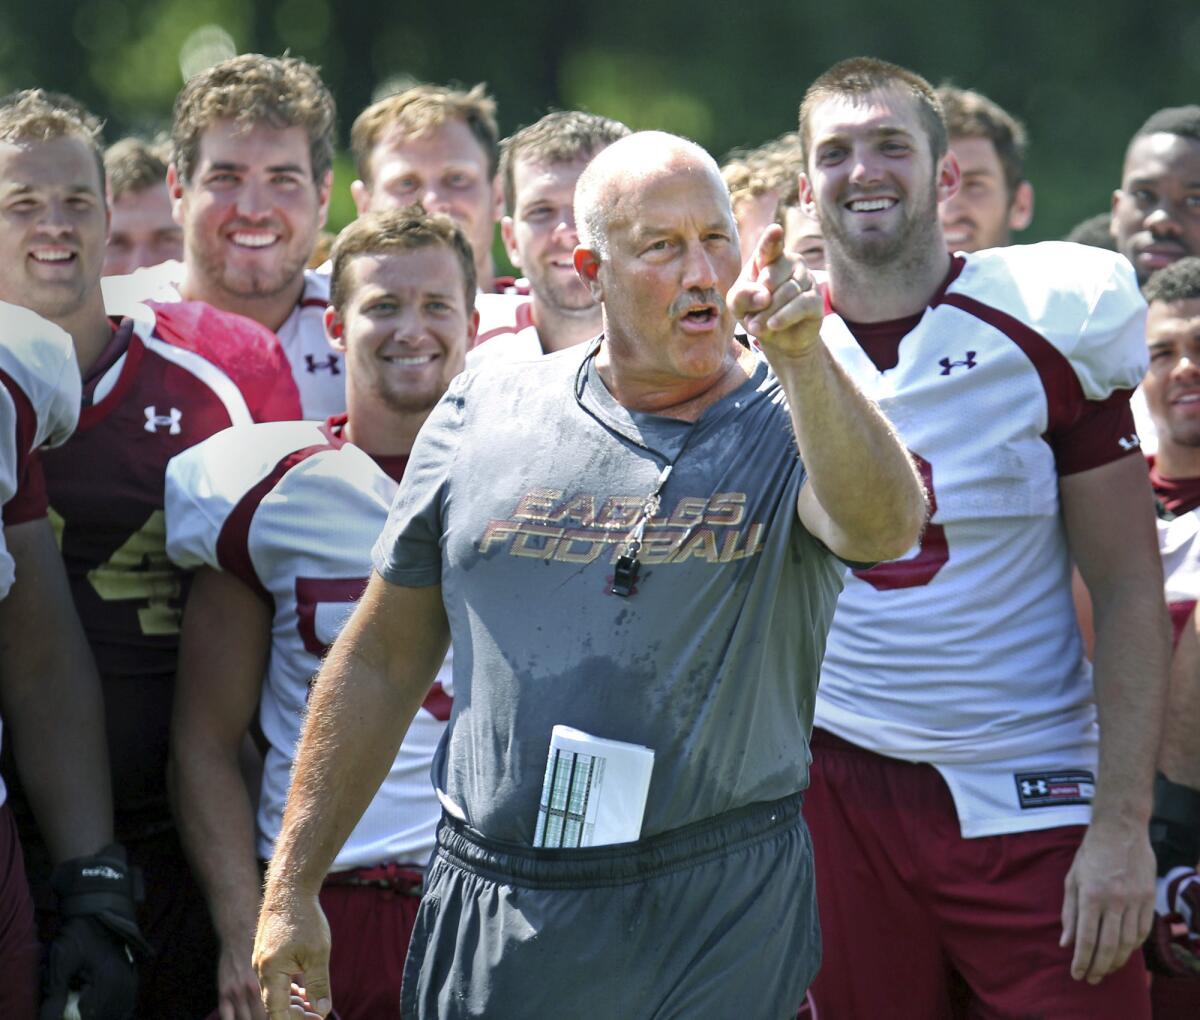 Boston College football Coach Steve Addazio gestures after being doused during the "ice bucket challenge".